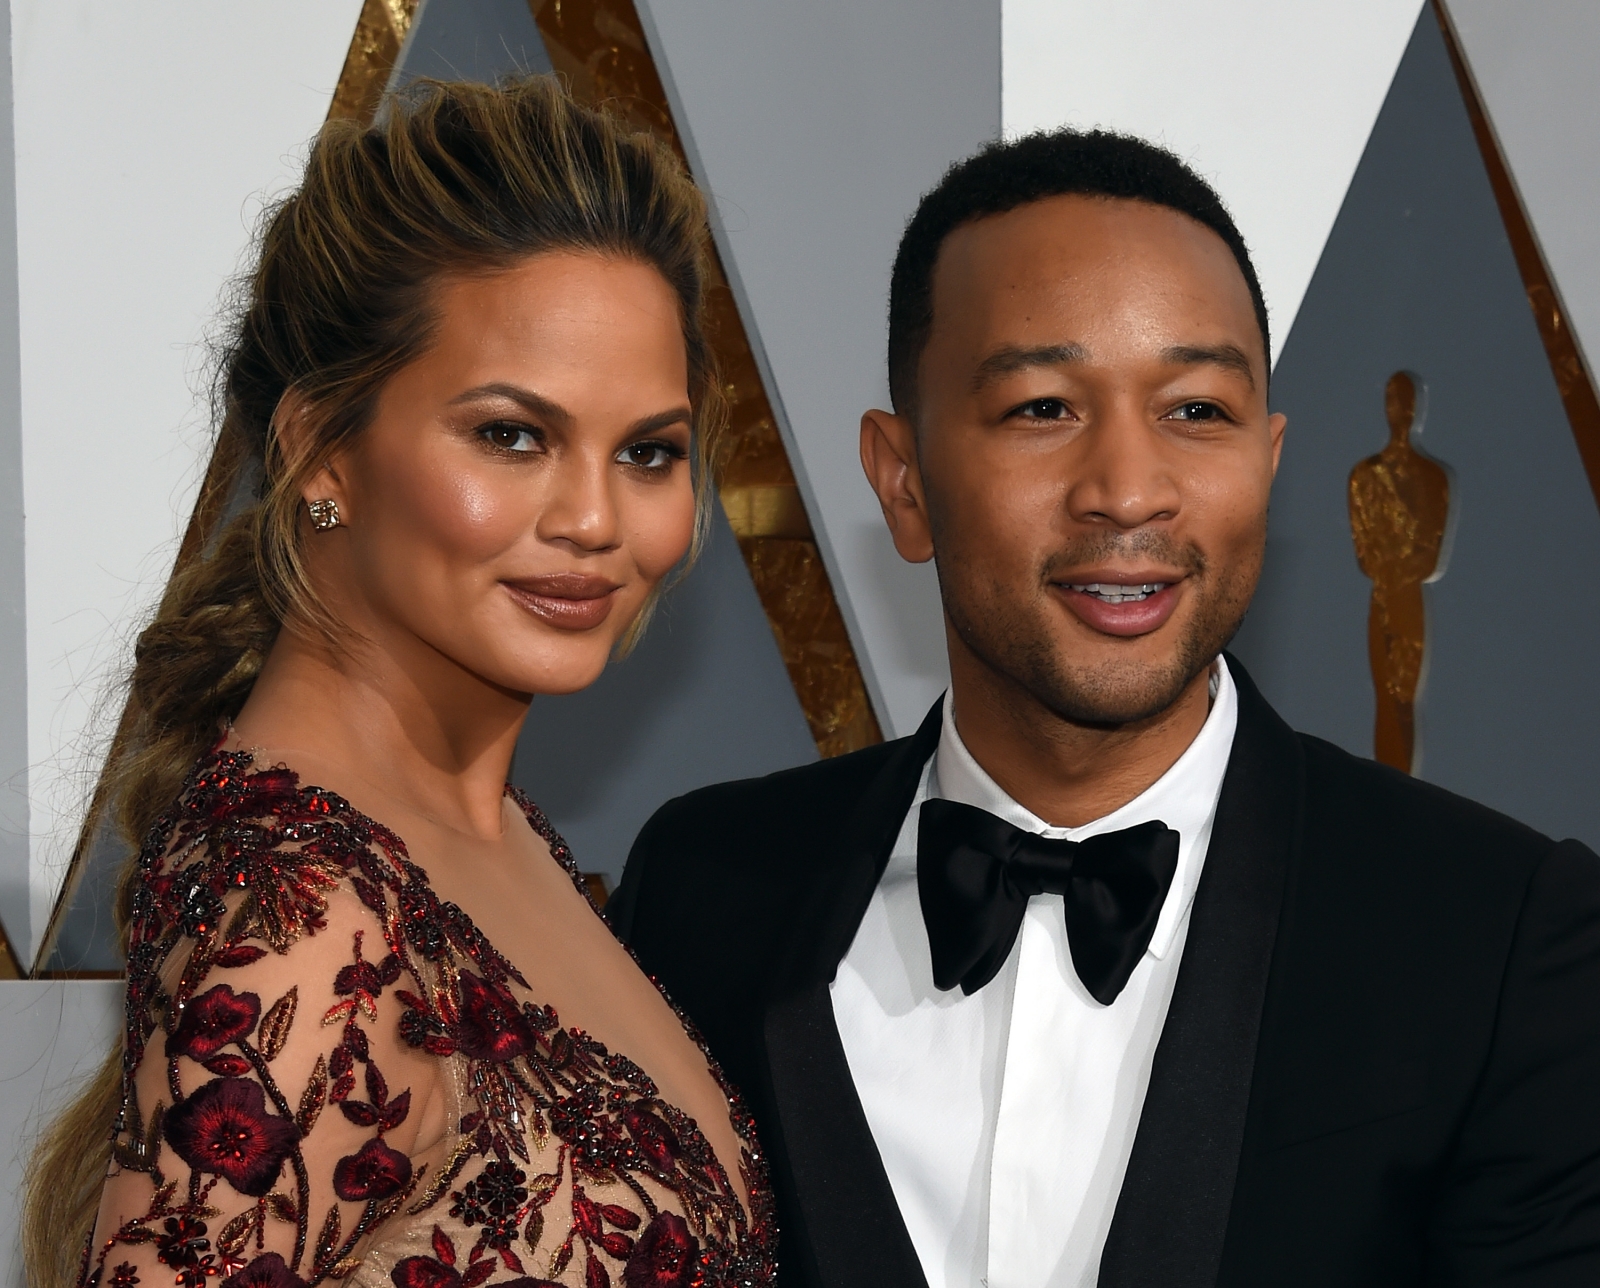 Chrissy Teigen goes naked in raunchy photo shoot with John 